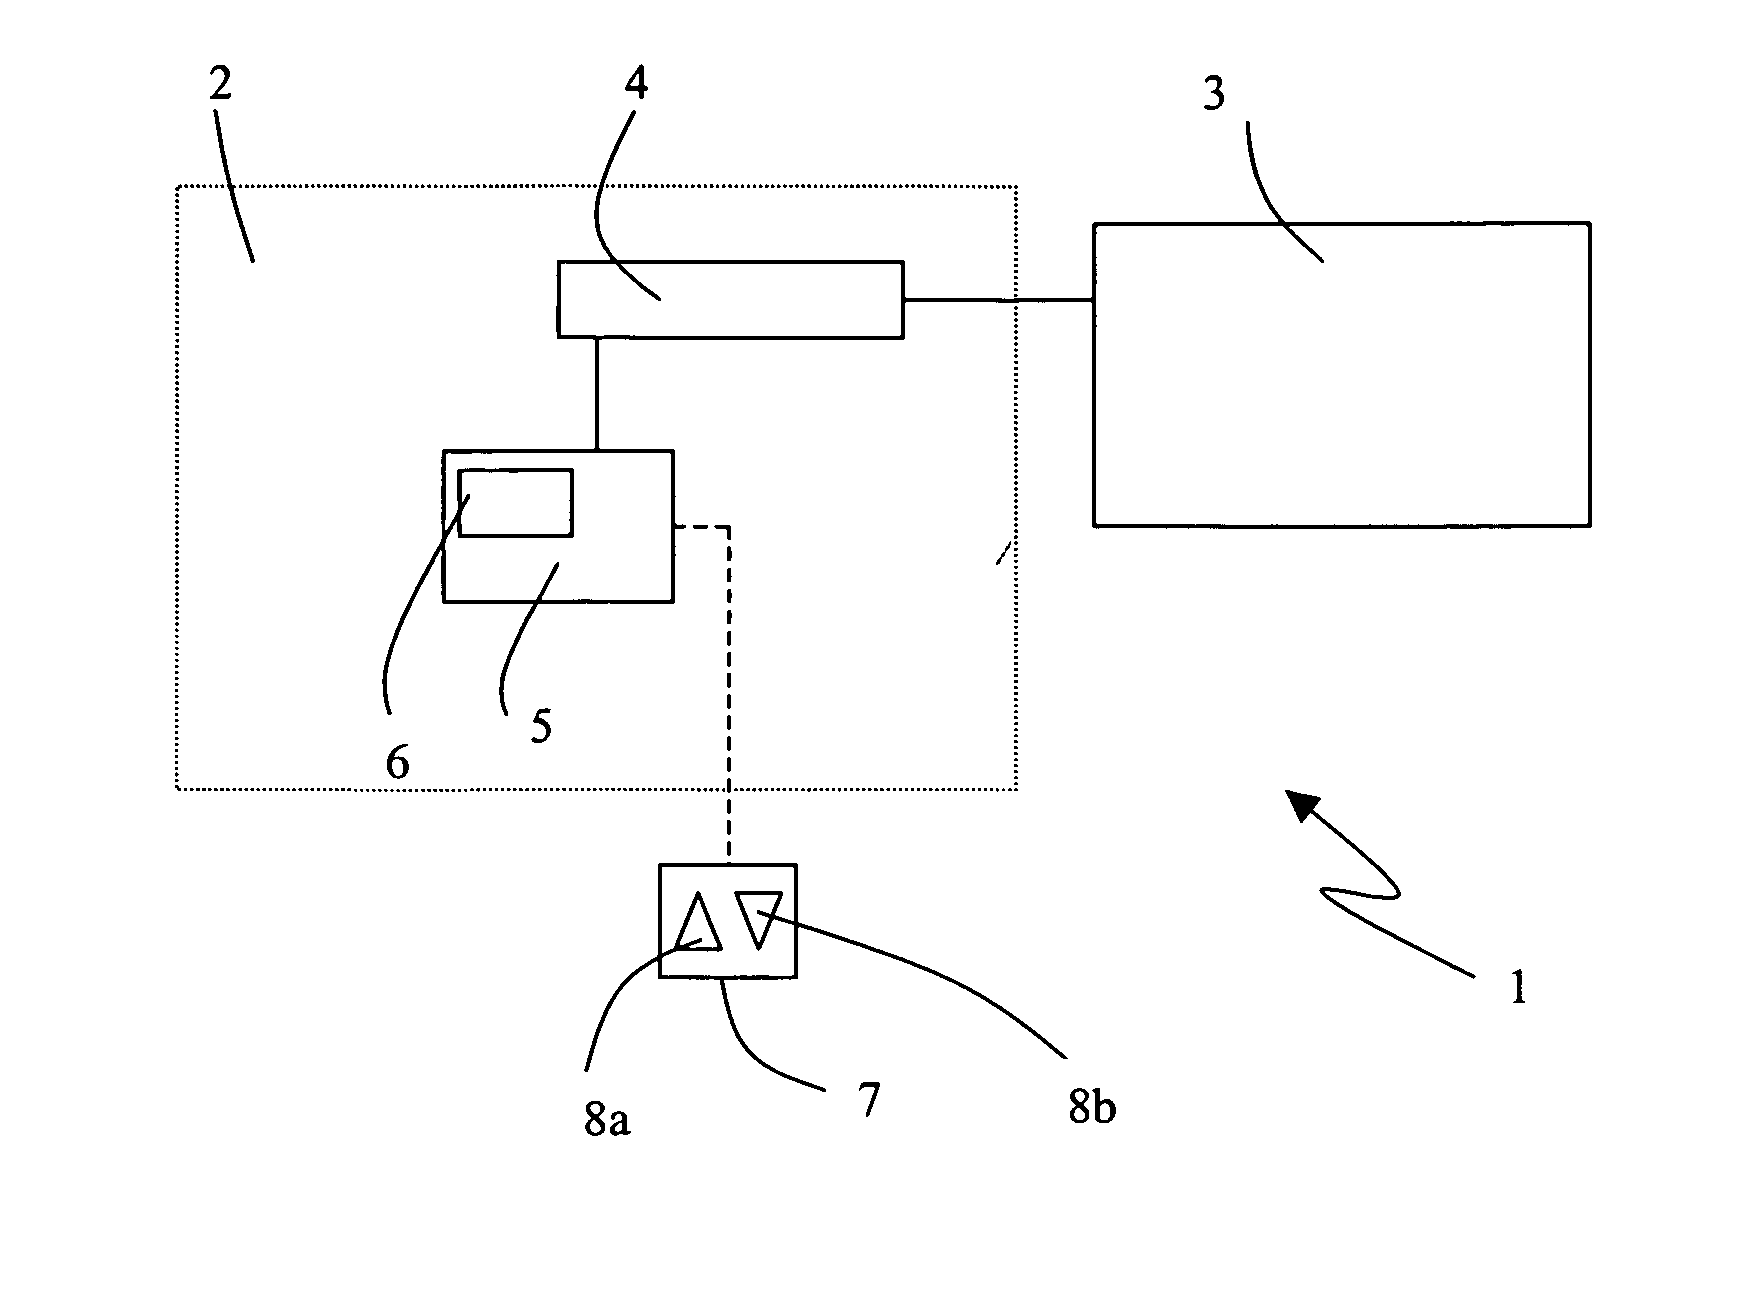 Method of operating a controlled roller blind supplied by way of a wire control interface